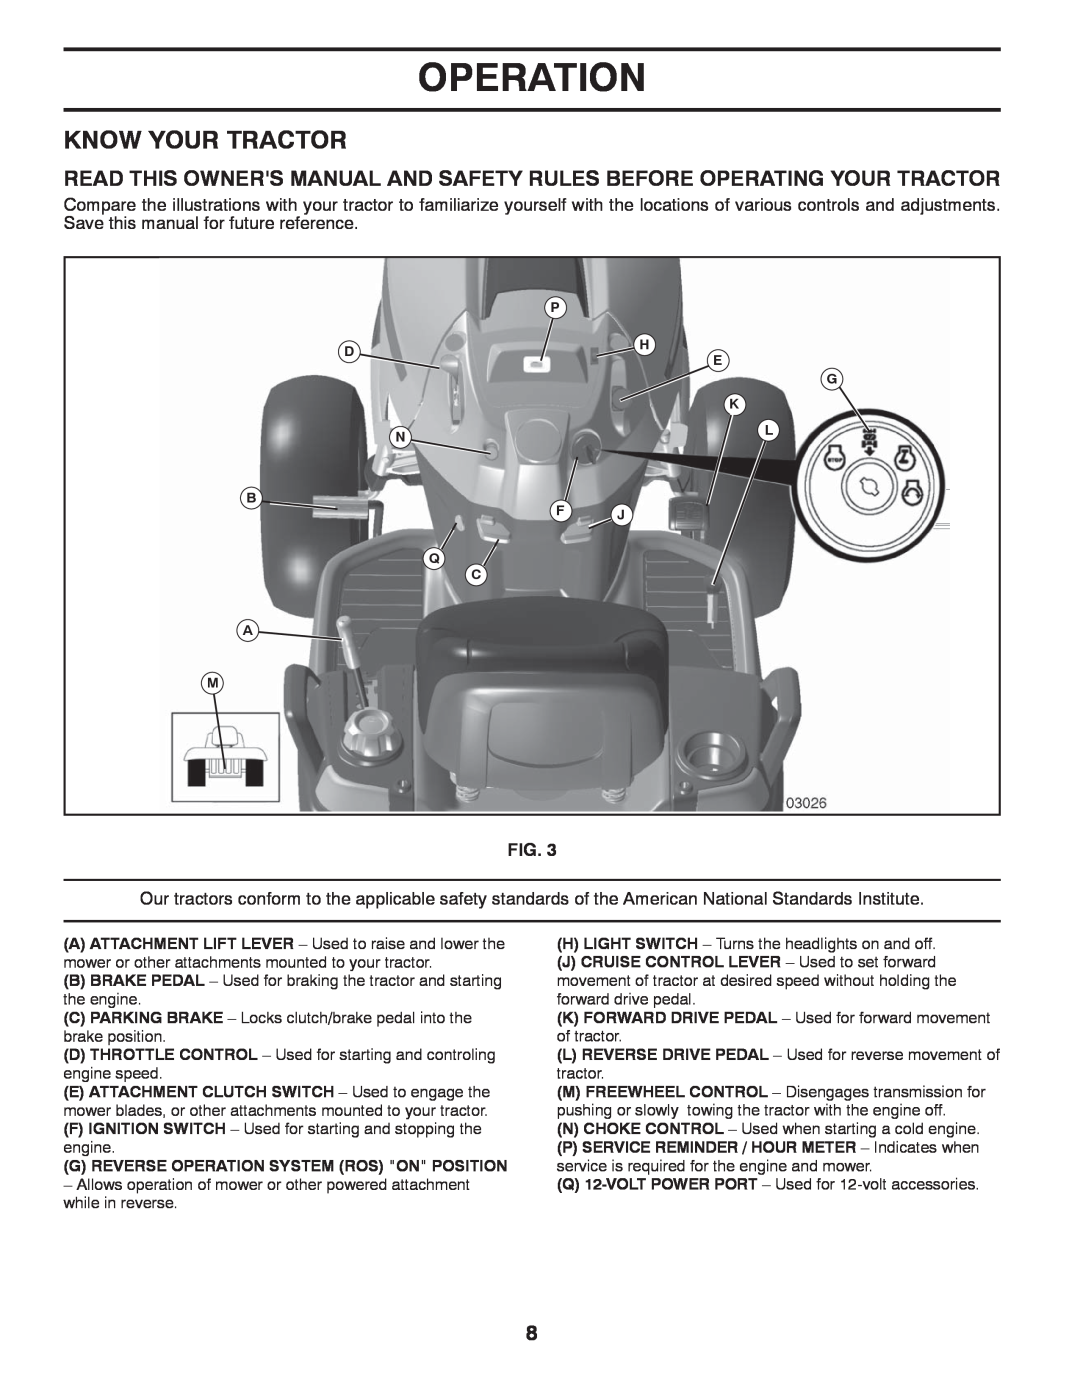 Husqvarna YTH1542XPT owner manual Know Your Tractor, Operation 